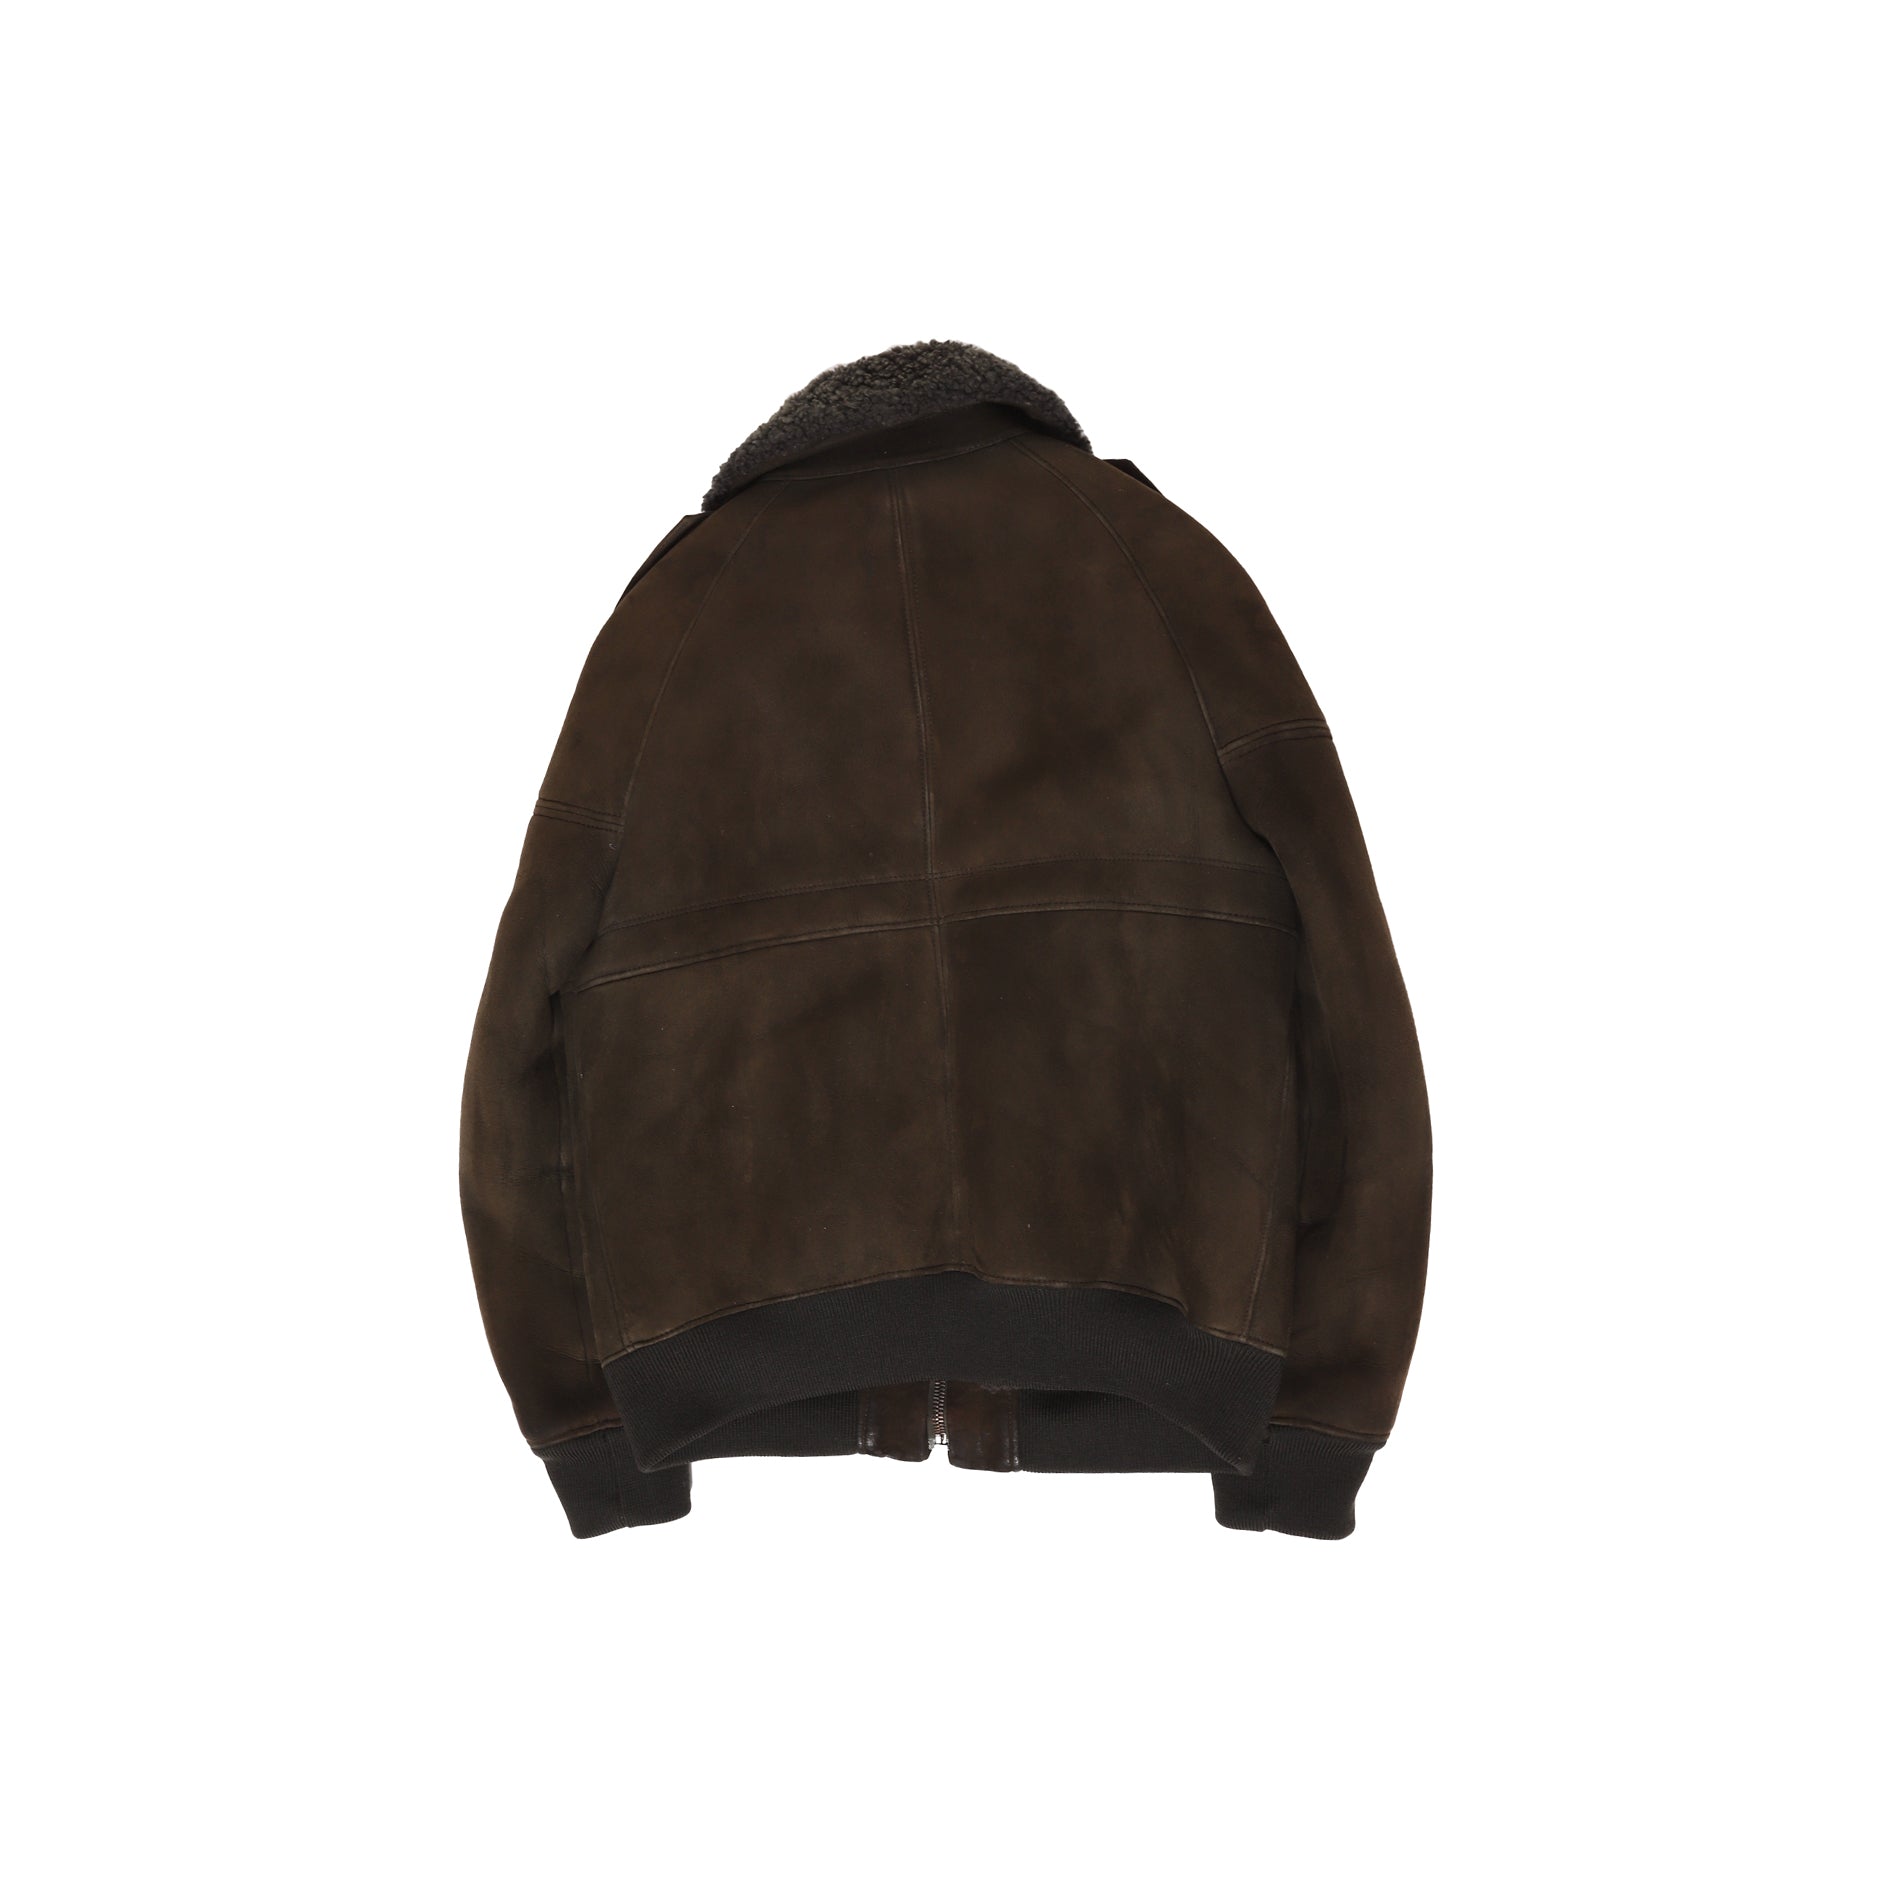 Gucci by Tom Ford 90s Shearling Bomber Jacket